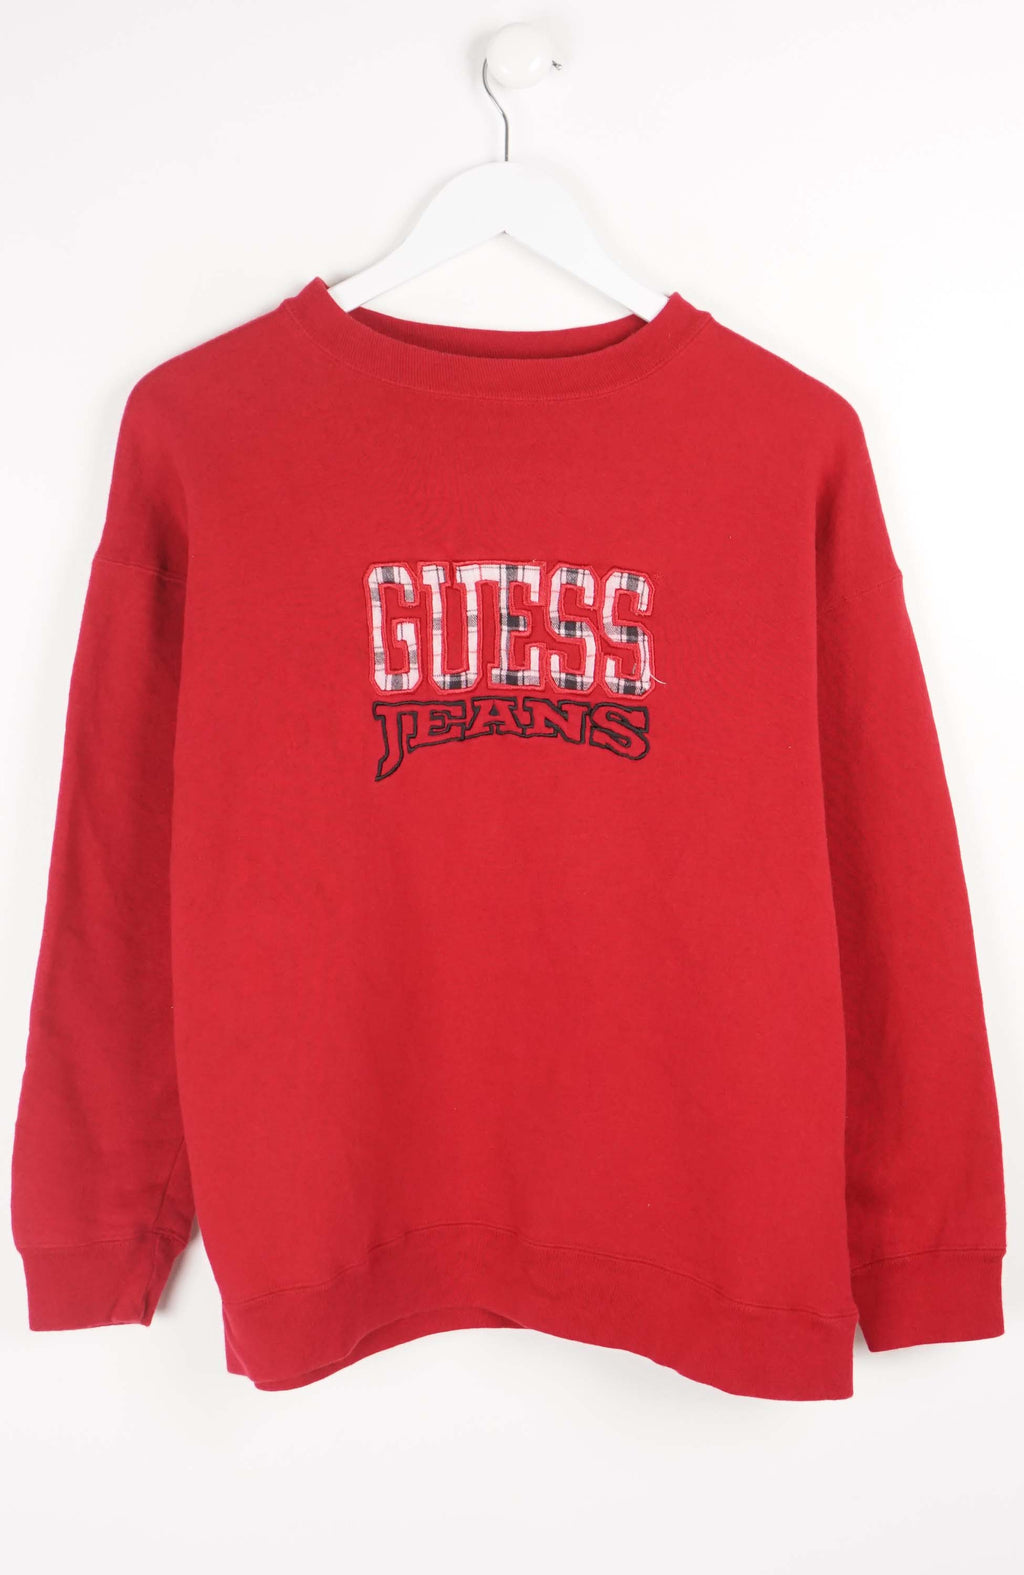 VINTAGE GUESS JEANS SWEATER (S)